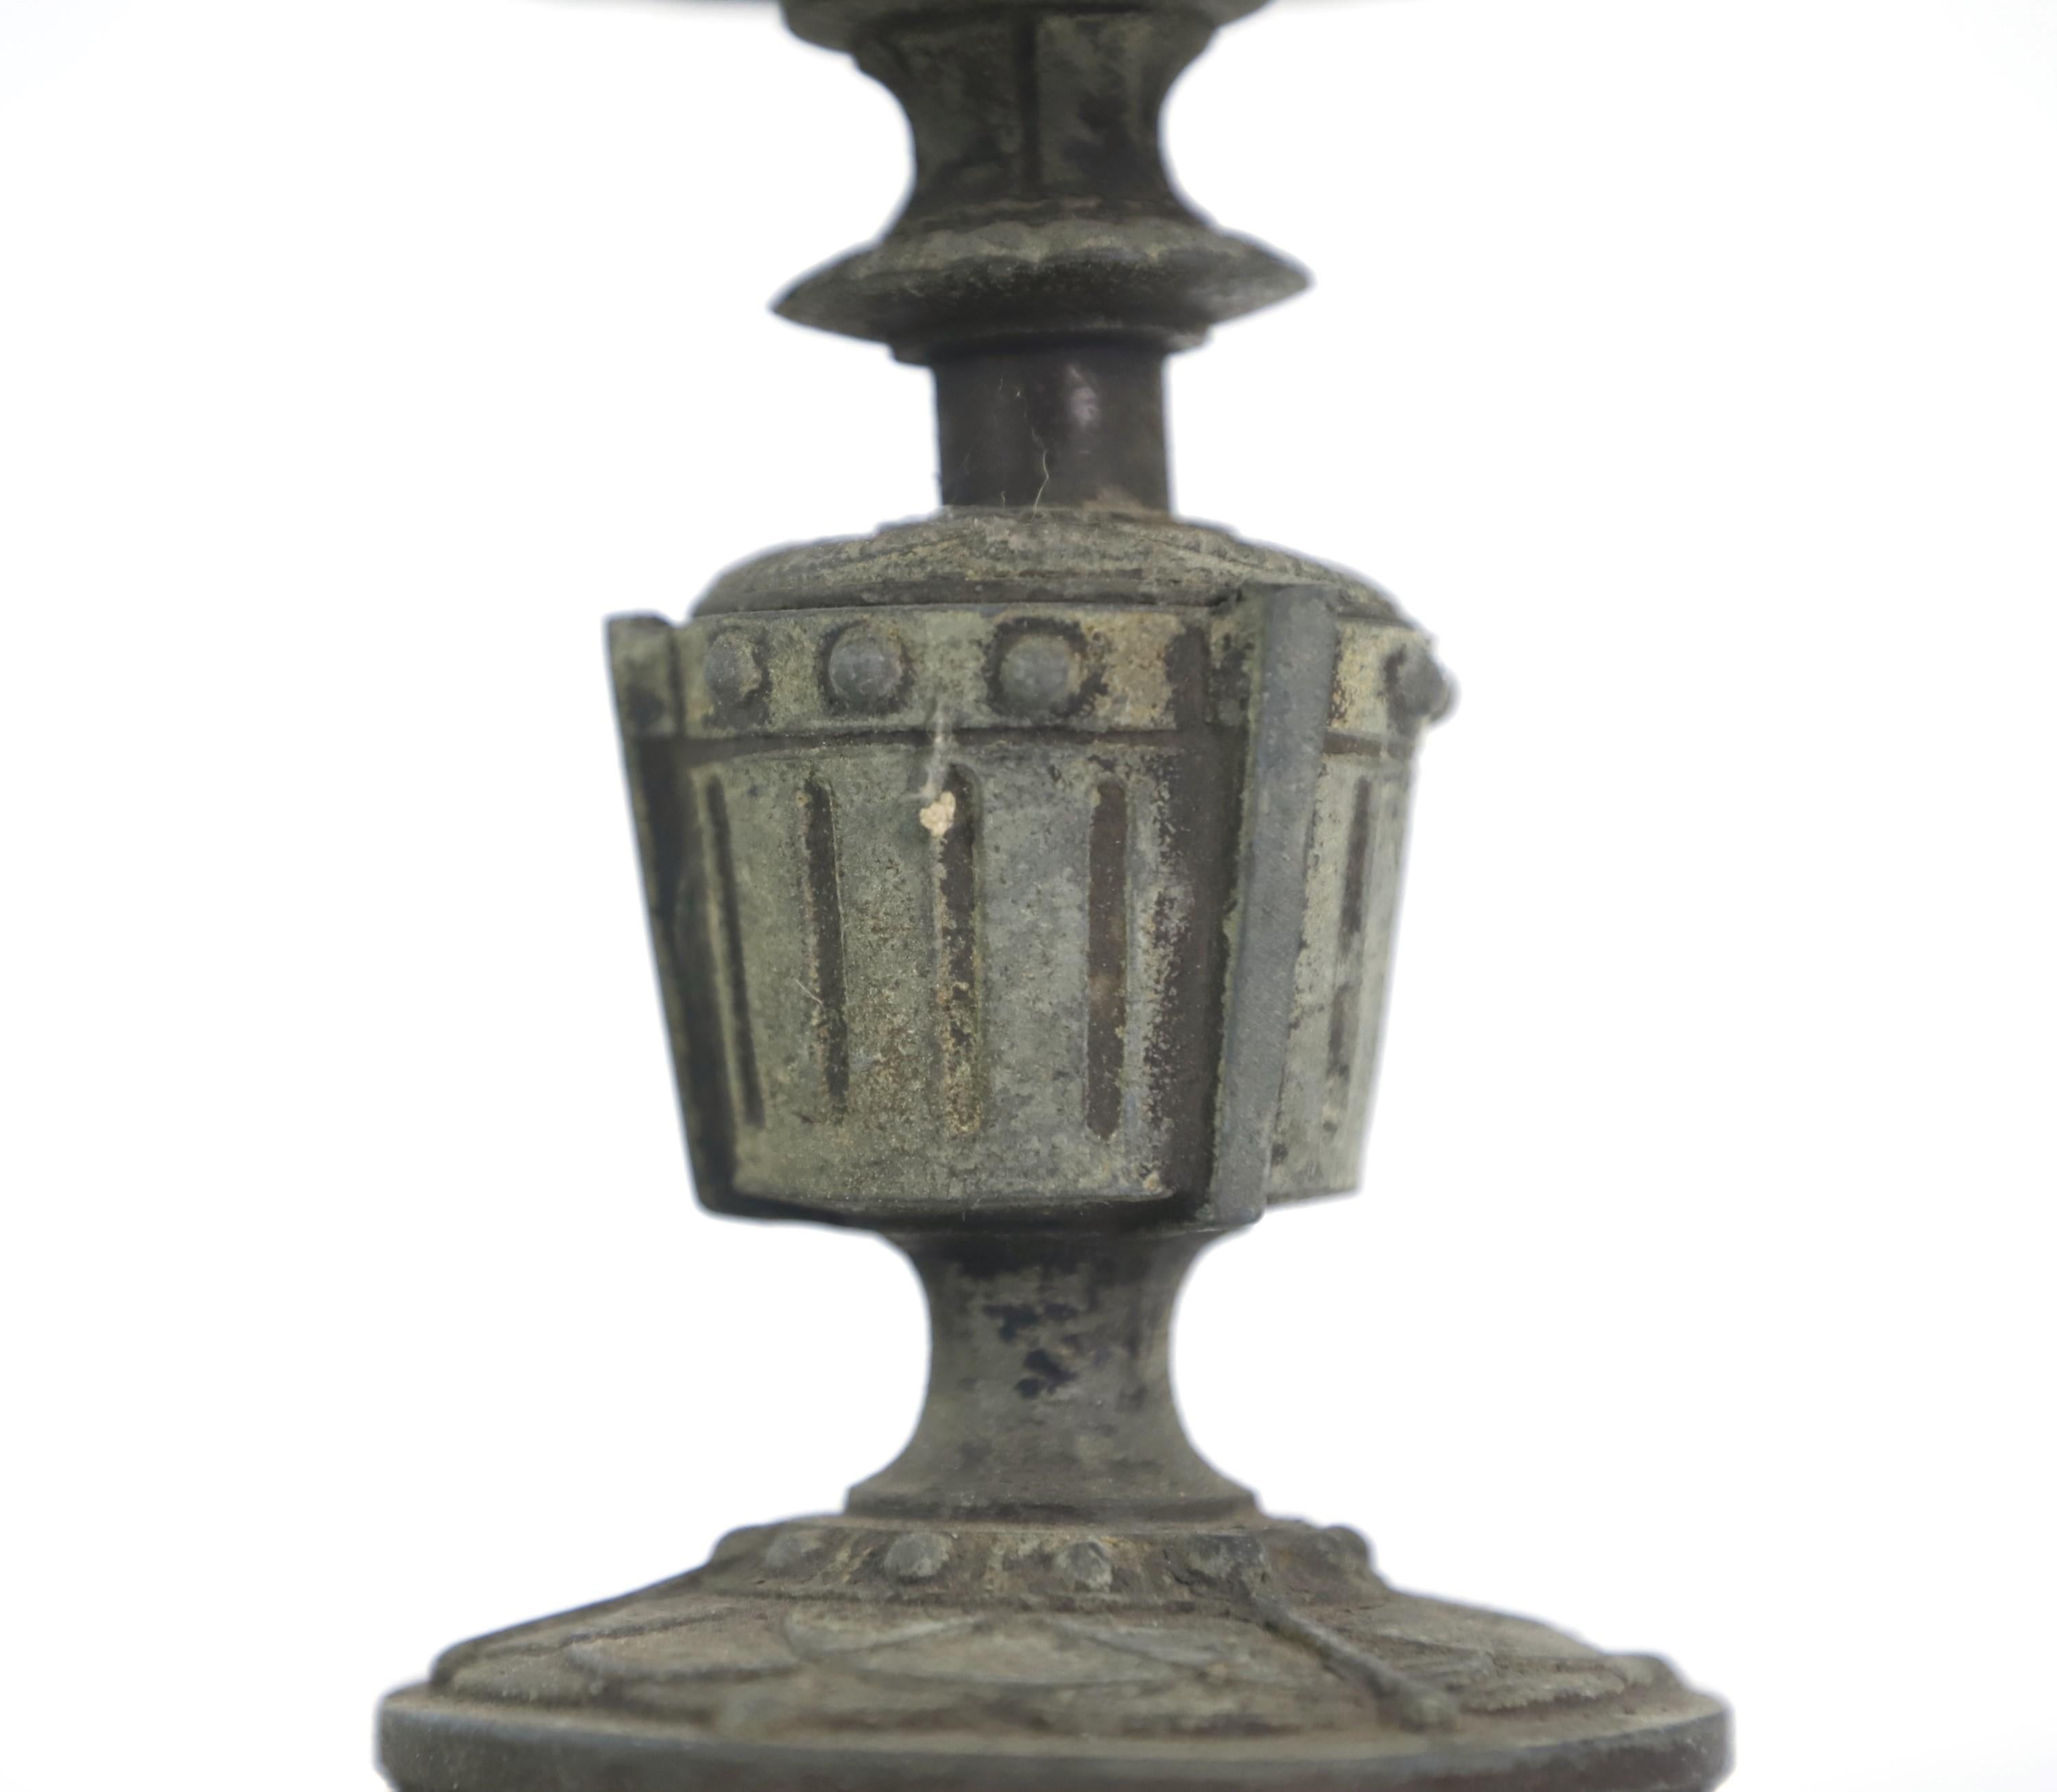 Early 20th century French antique oil lamp stand with three legs. Can also be used as a candelas holder or a very small planter. Ornate detailing around the perimeter of the top. It is stamped on the bottom. Features original patina. Please note,